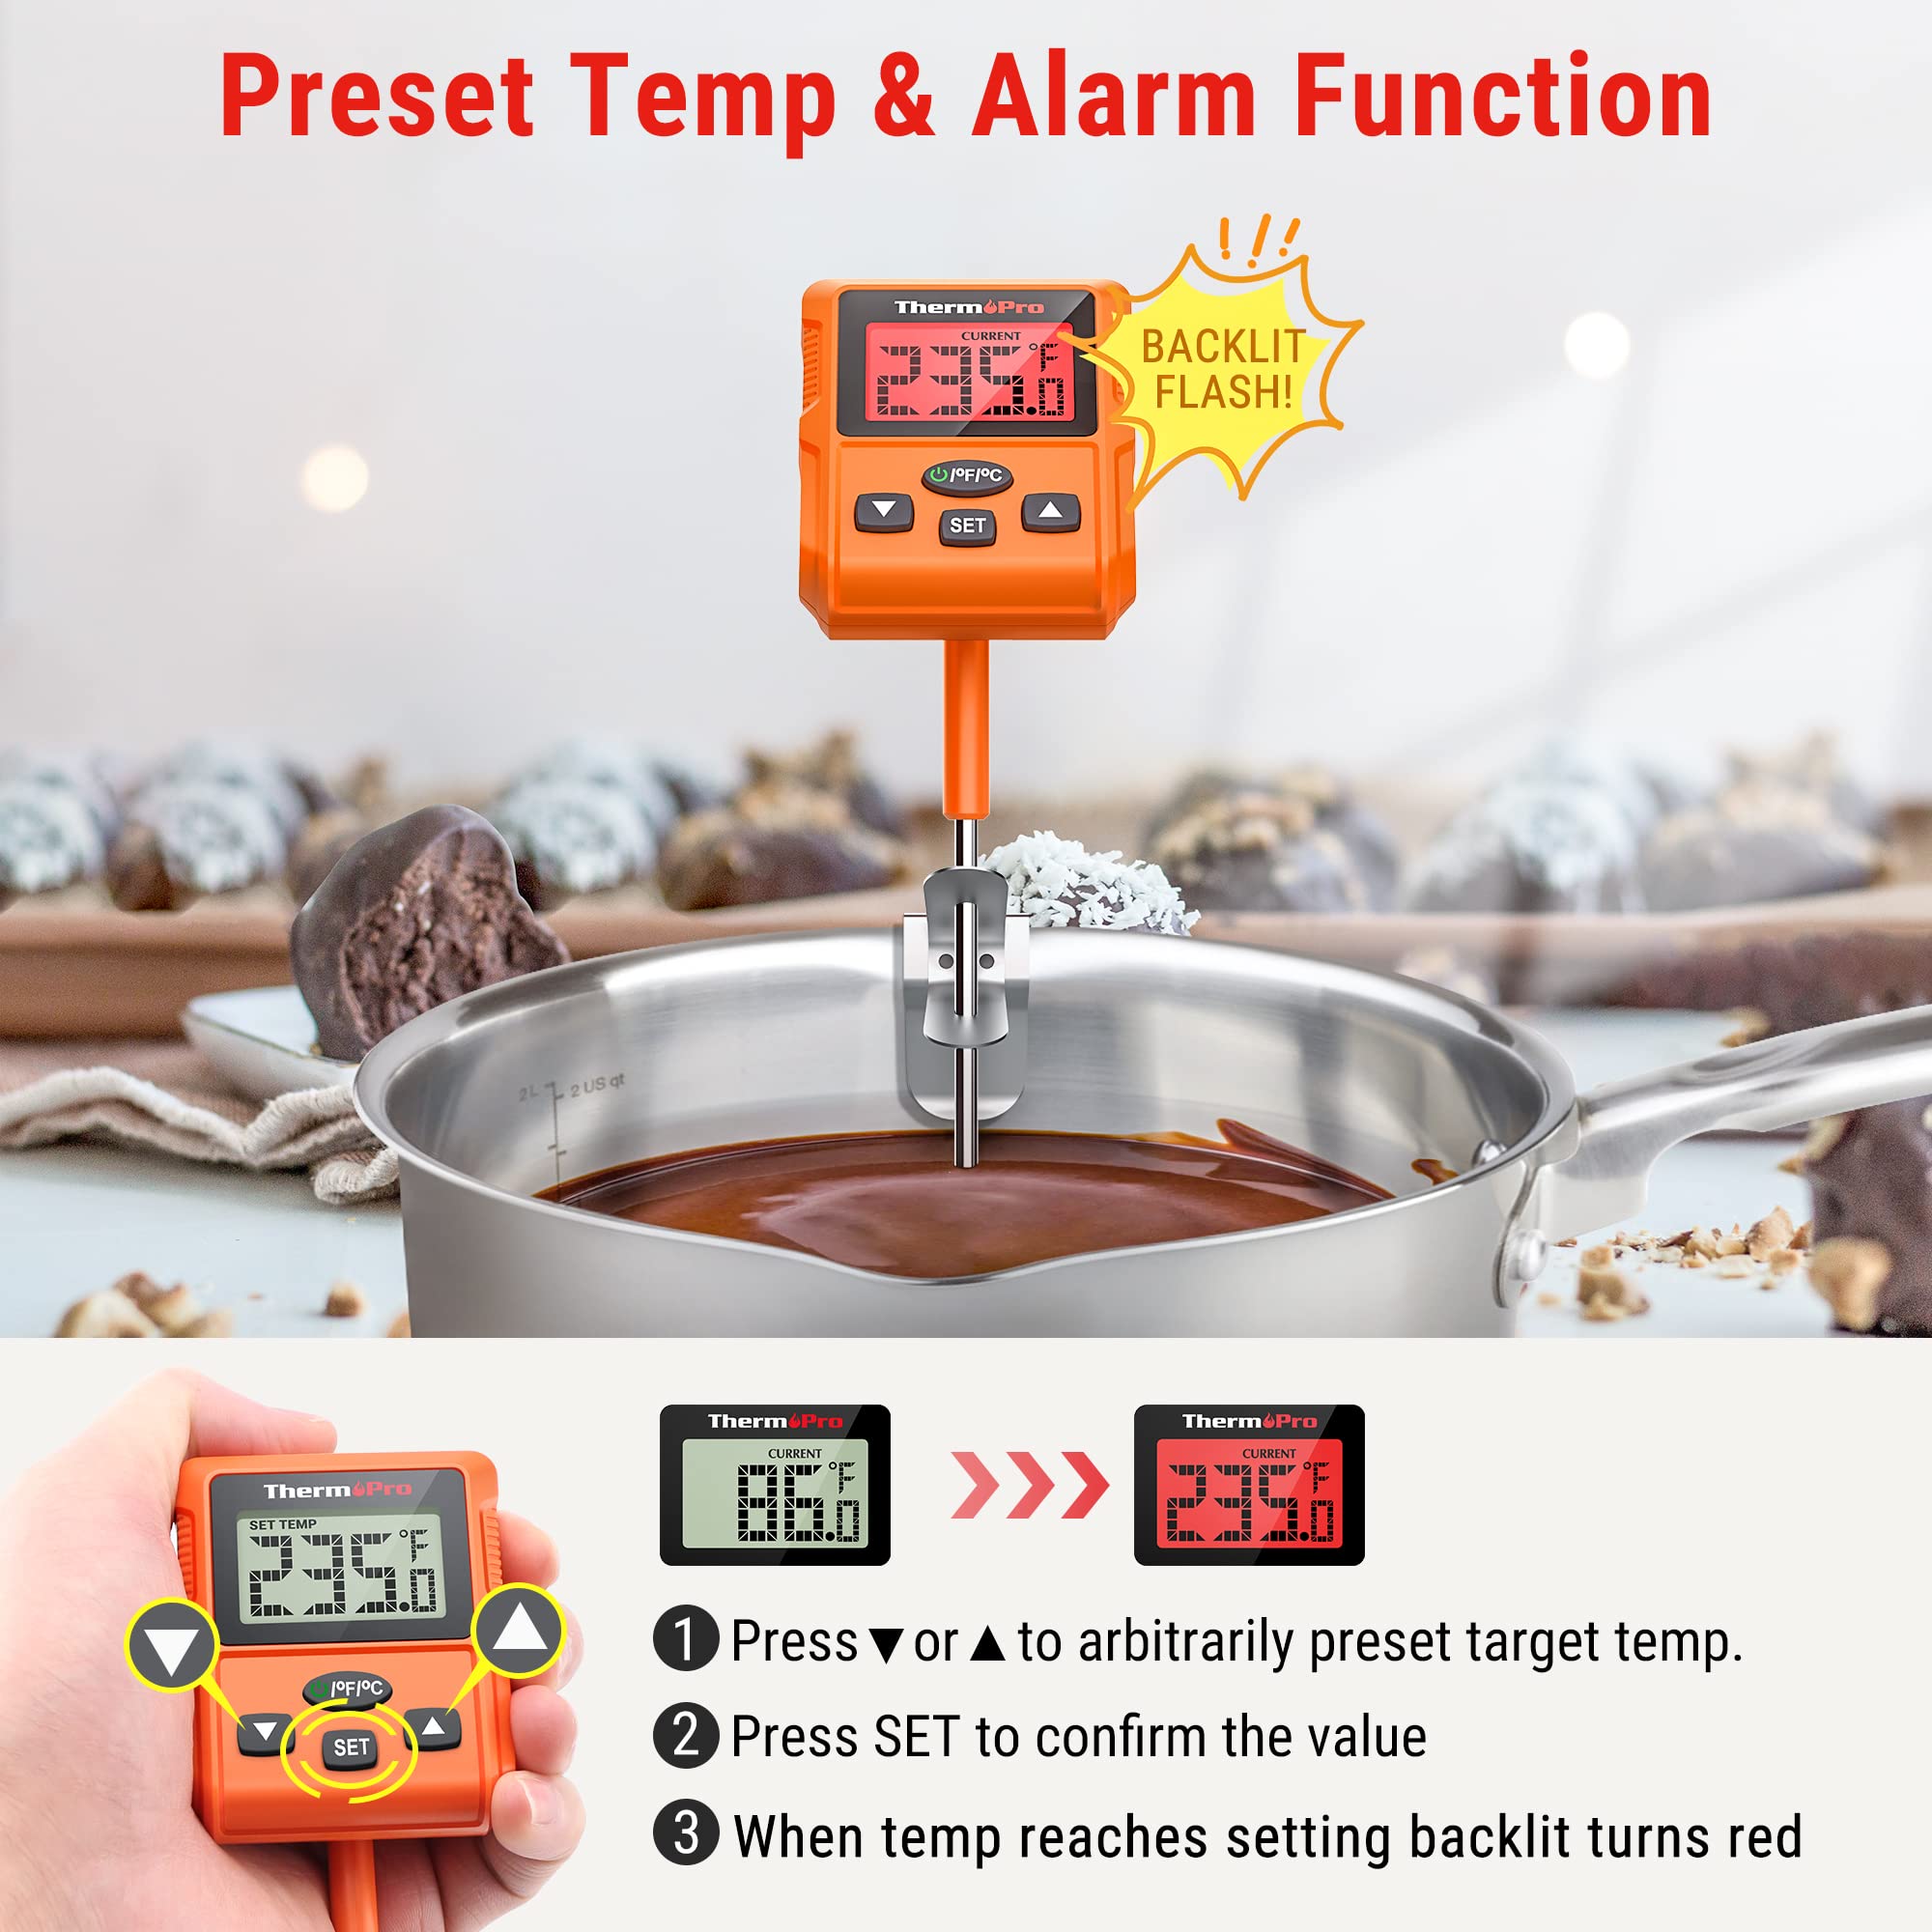 ThermoPro TP511 Digital Candy Thermometer + ThermoPro TP420 2-in-1 Instant Read Thermometer for Cooking